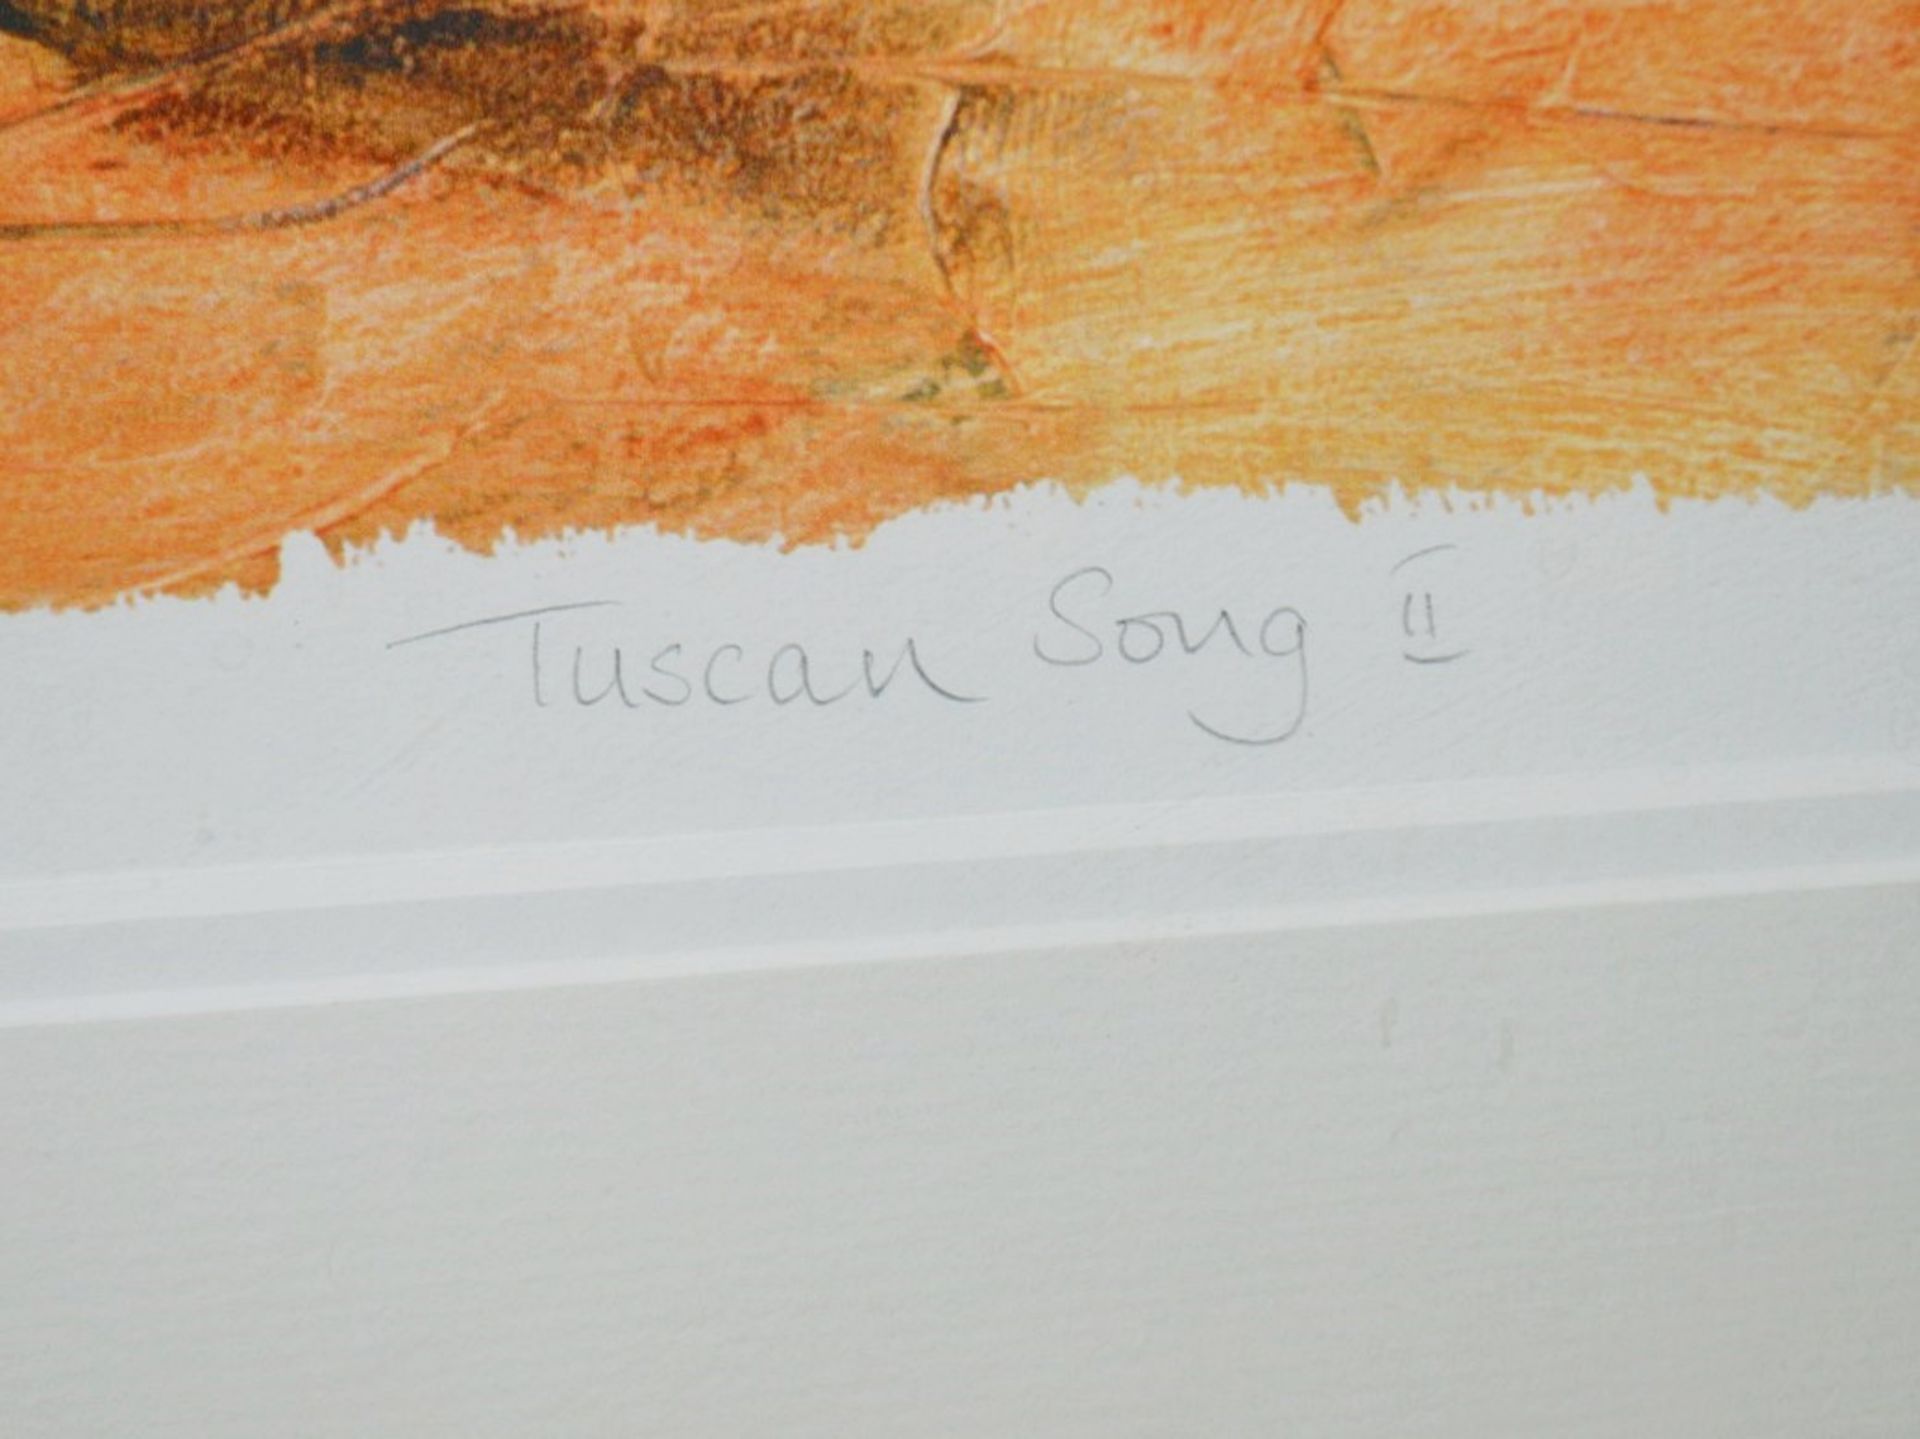 1 x Framed Limited Edition Art Print 'Tuscan Song II' By RICHARD PARGETER - Signed And Mounted - - Image 5 of 6